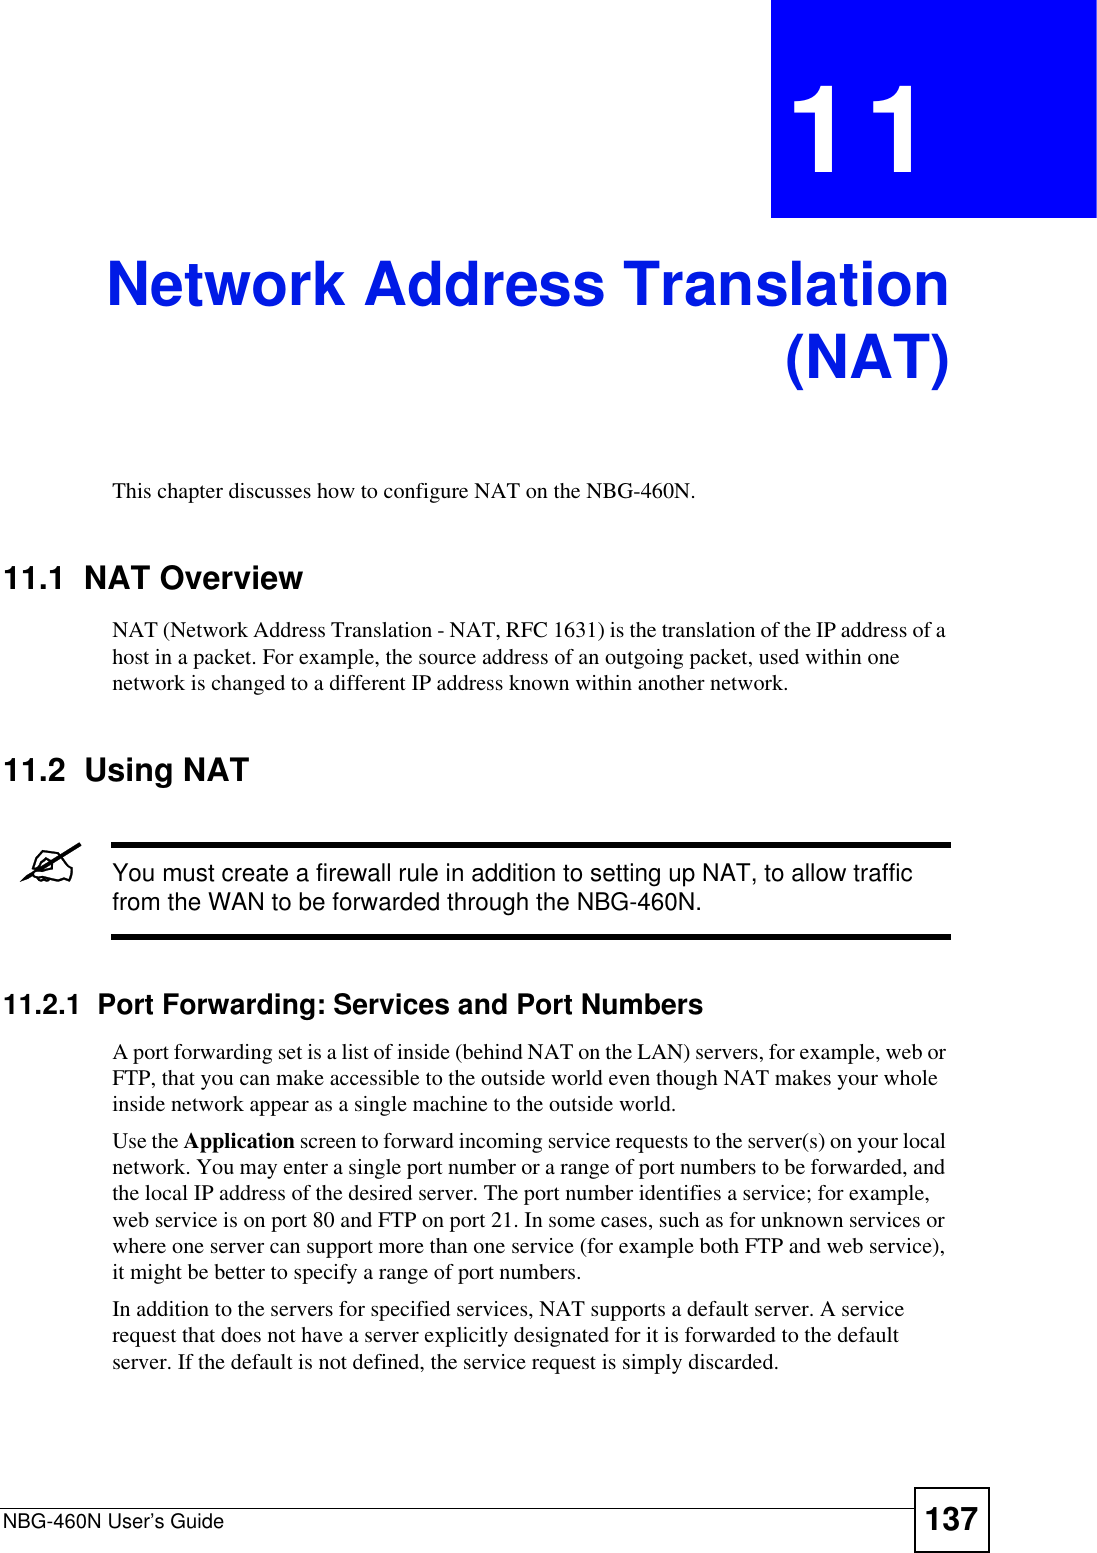 NBG-460N User’s Guide 137CHAPTER 11Network Address Translation(NAT)This chapter discusses how to configure NAT on the NBG-460N.11.1  NAT OverviewNAT (Network Address Translation - NAT, RFC 1631) is the translation of the IP address of a host in a packet. For example, the source address of an outgoing packet, used within one network is changed to a different IP address known within another network.11.2  Using NAT&quot;You must create a firewall rule in addition to setting up NAT, to allow traffic from the WAN to be forwarded through the NBG-460N.11.2.1  Port Forwarding: Services and Port NumbersA port forwarding set is a list of inside (behind NAT on the LAN) servers, for example, web or FTP, that you can make accessible to the outside world even though NAT makes your whole inside network appear as a single machine to the outside world. Use the Application screen to forward incoming service requests to the server(s) on your local network. You may enter a single port number or a range of port numbers to be forwarded, and the local IP address of the desired server. The port number identifies a service; for example, web service is on port 80 and FTP on port 21. In some cases, such as for unknown services or where one server can support more than one service (for example both FTP and web service), it might be better to specify a range of port numbers.In addition to the servers for specified services, NAT supports a default server. A service request that does not have a server explicitly designated for it is forwarded to the default server. If the default is not defined, the service request is simply discarded.